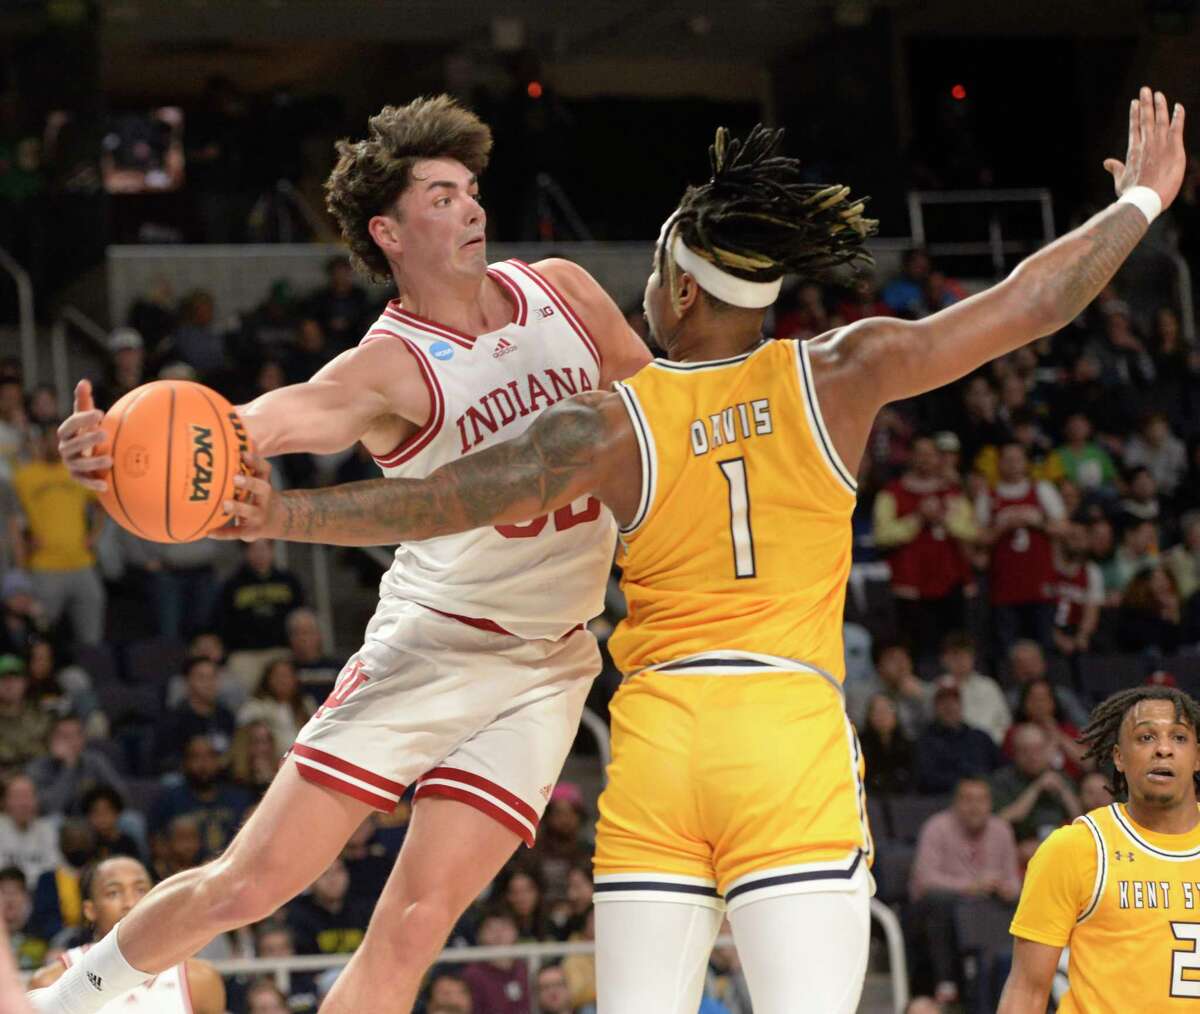 Kent State’s VonCameron Davis blocks a pass by Indiana’s Trey Galloway during their game in the first round of the NCAA Men’s Basketball tournament at MVP Arena in Albany, N.Y., on Friday, Mar. 17, 2023. (Jenn March, Special to the Times Union)